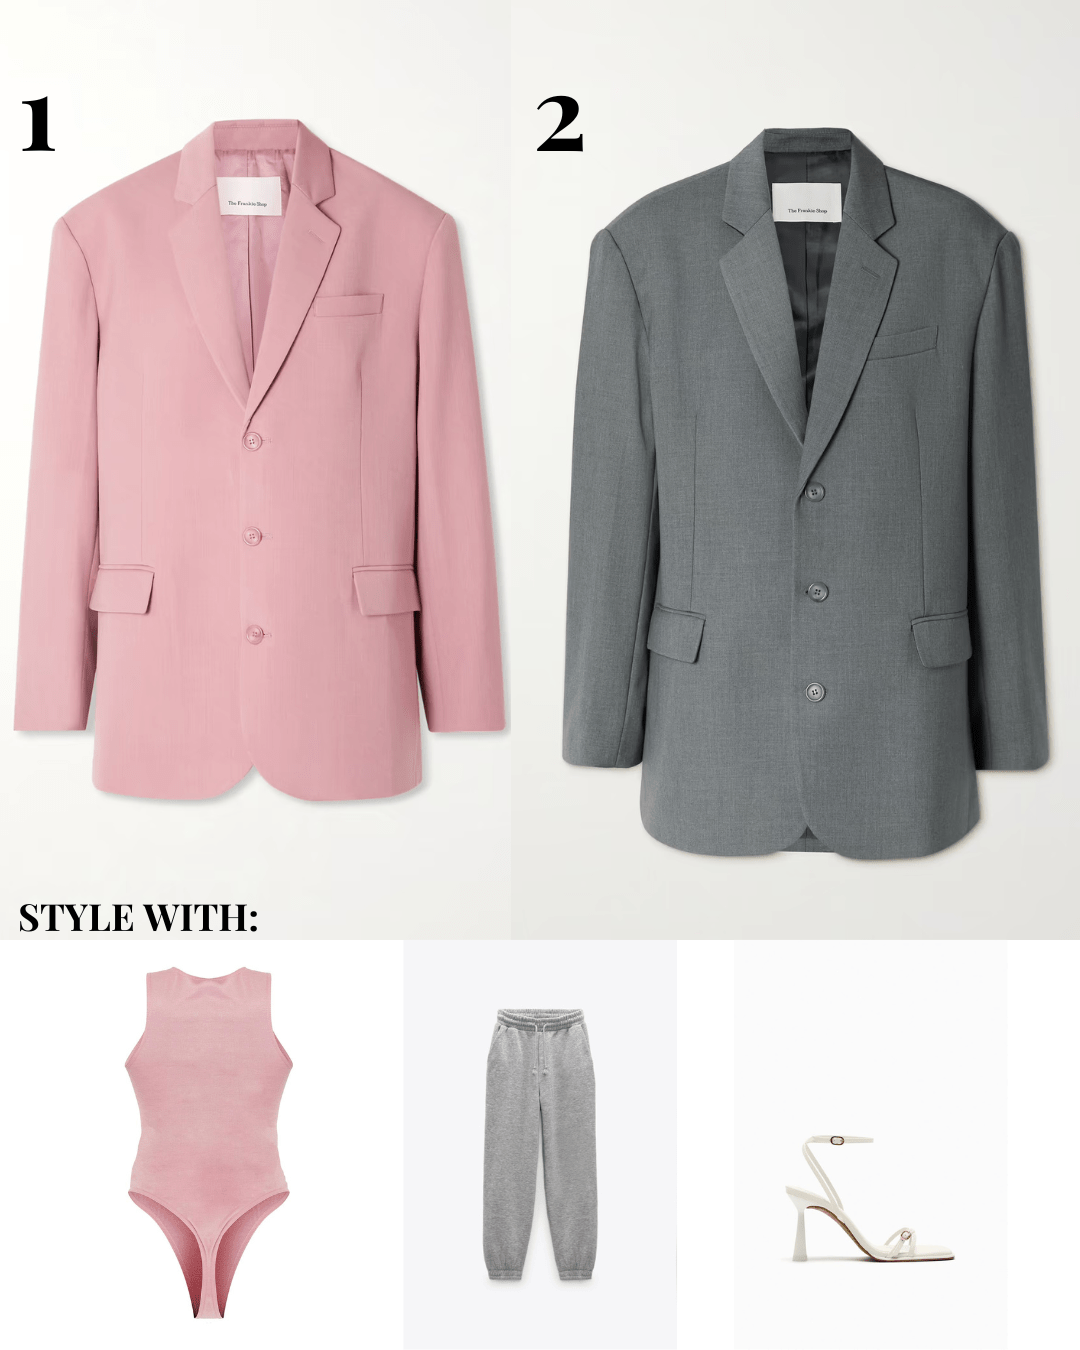 Pink and grey blazer outfit idea for women.